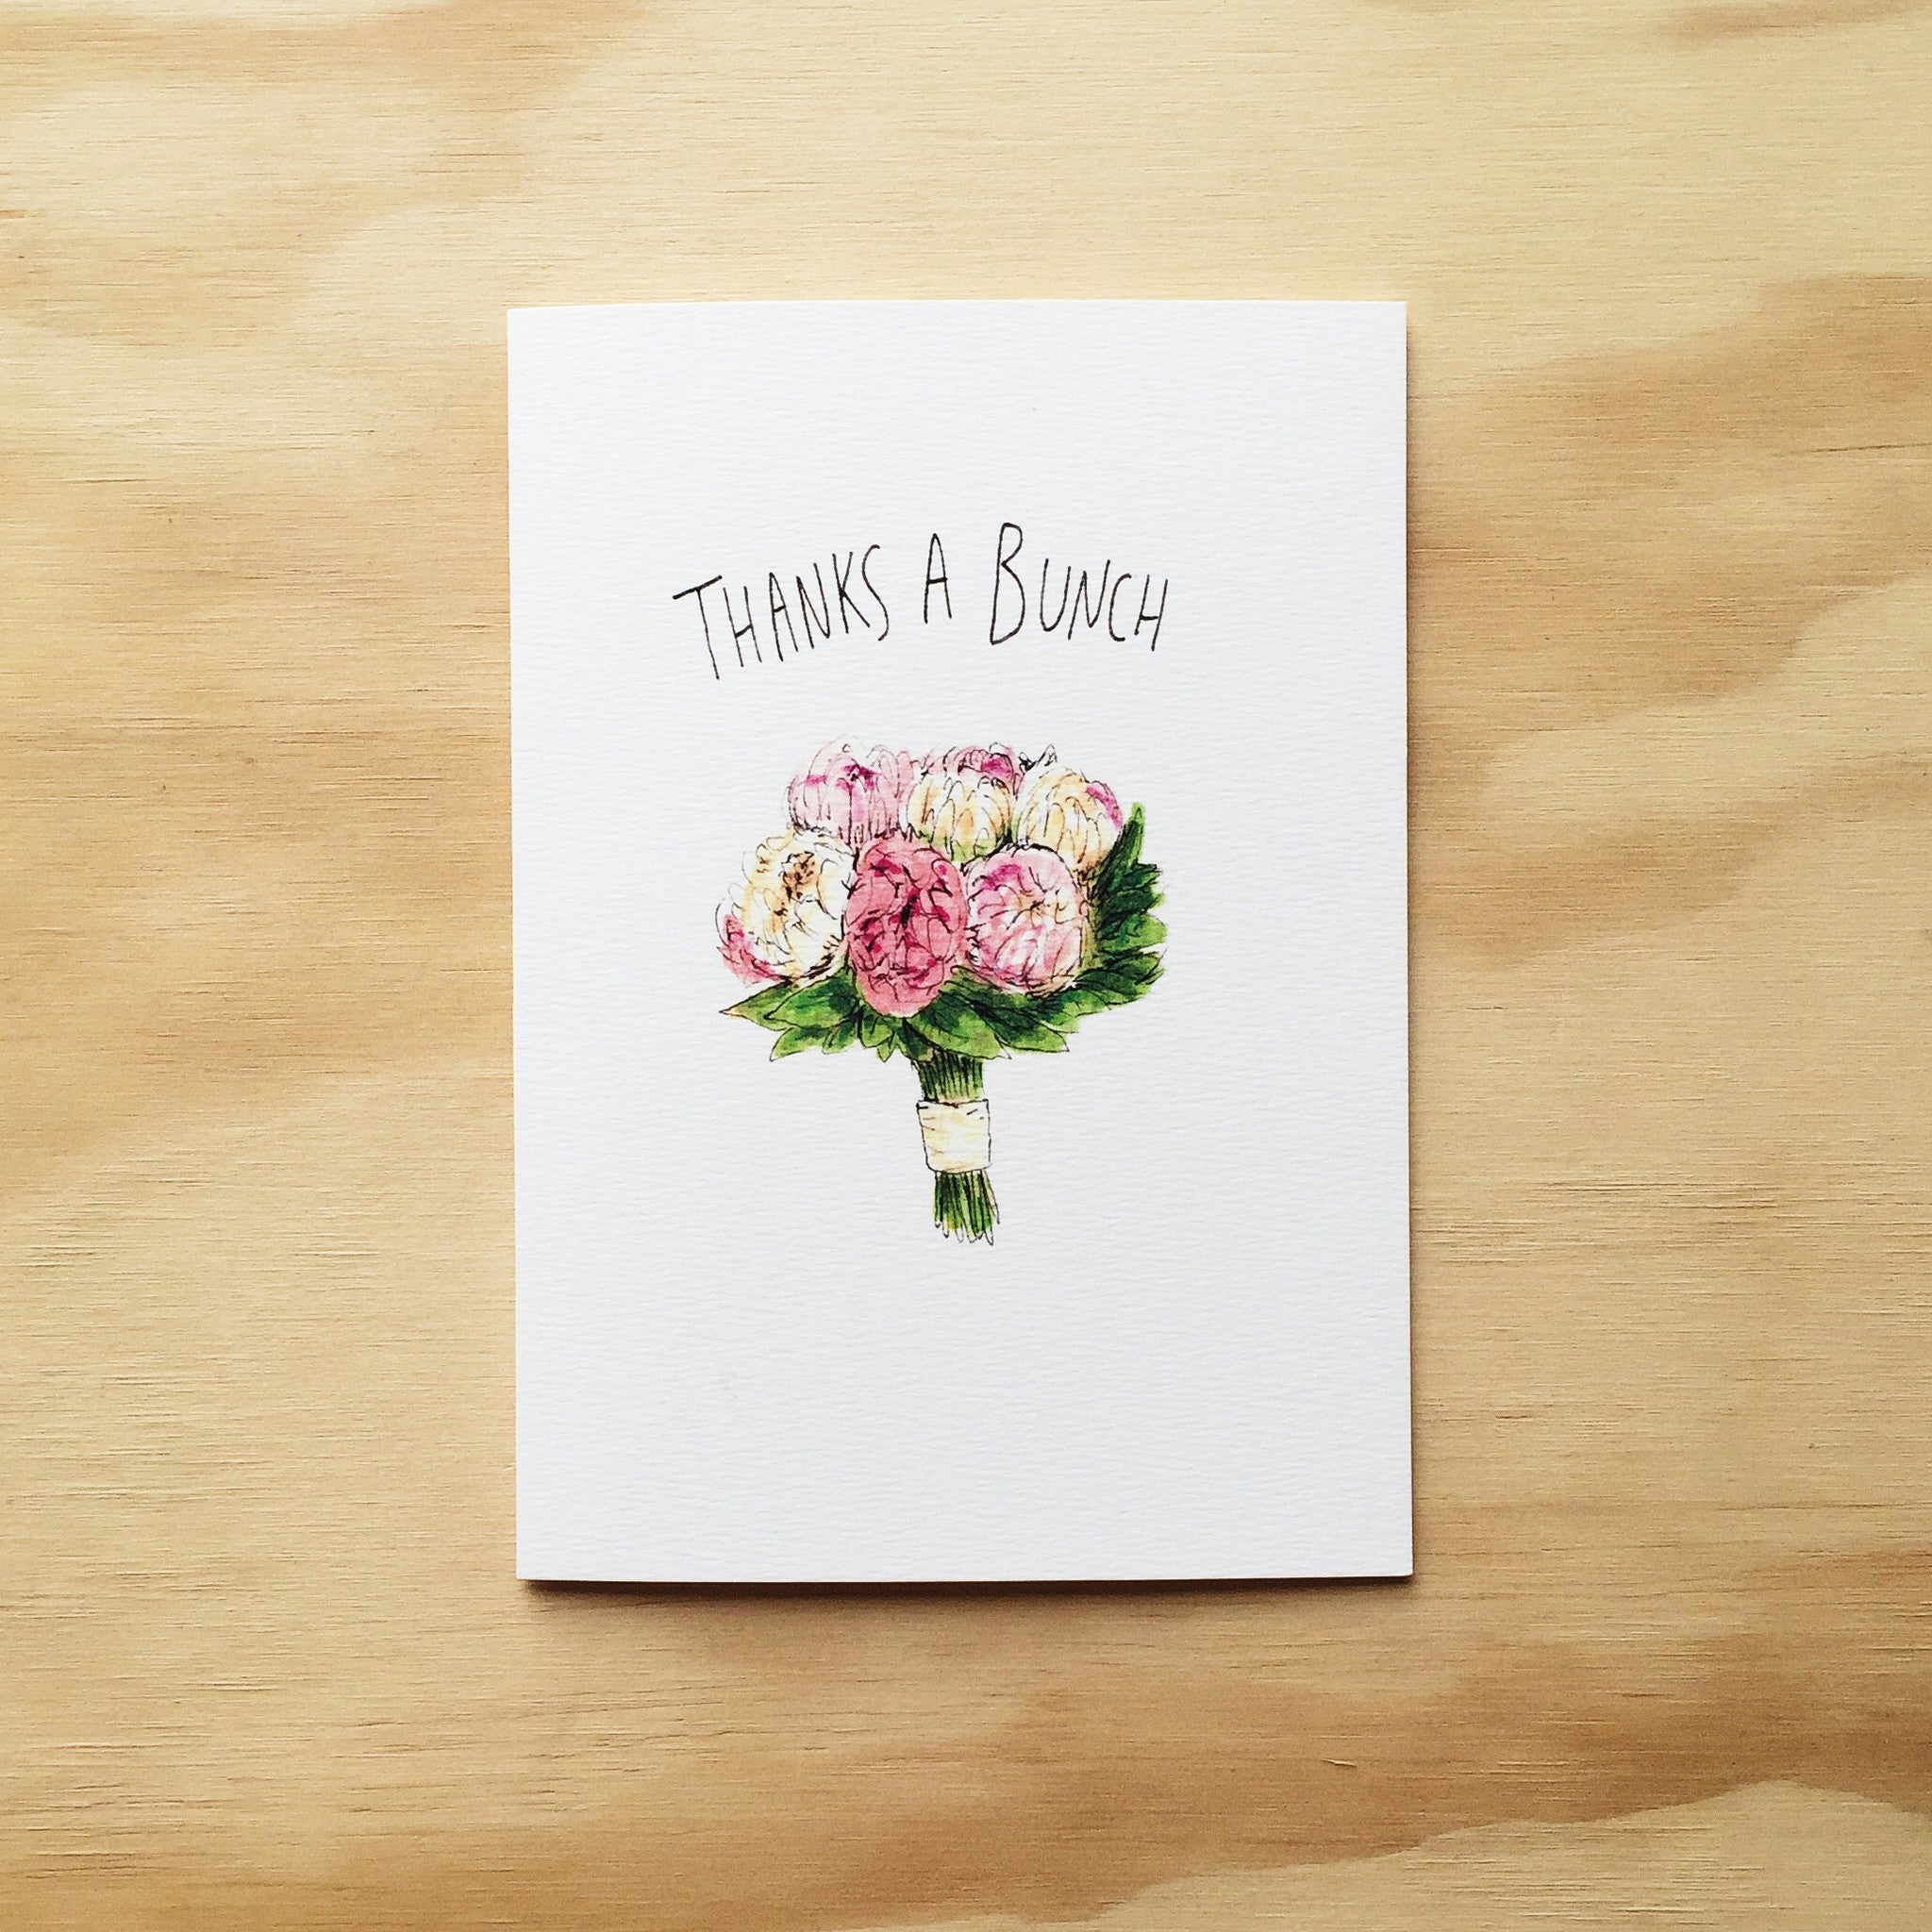 Thanks a Bunch | unique card | lovely card | hand-made card | cards